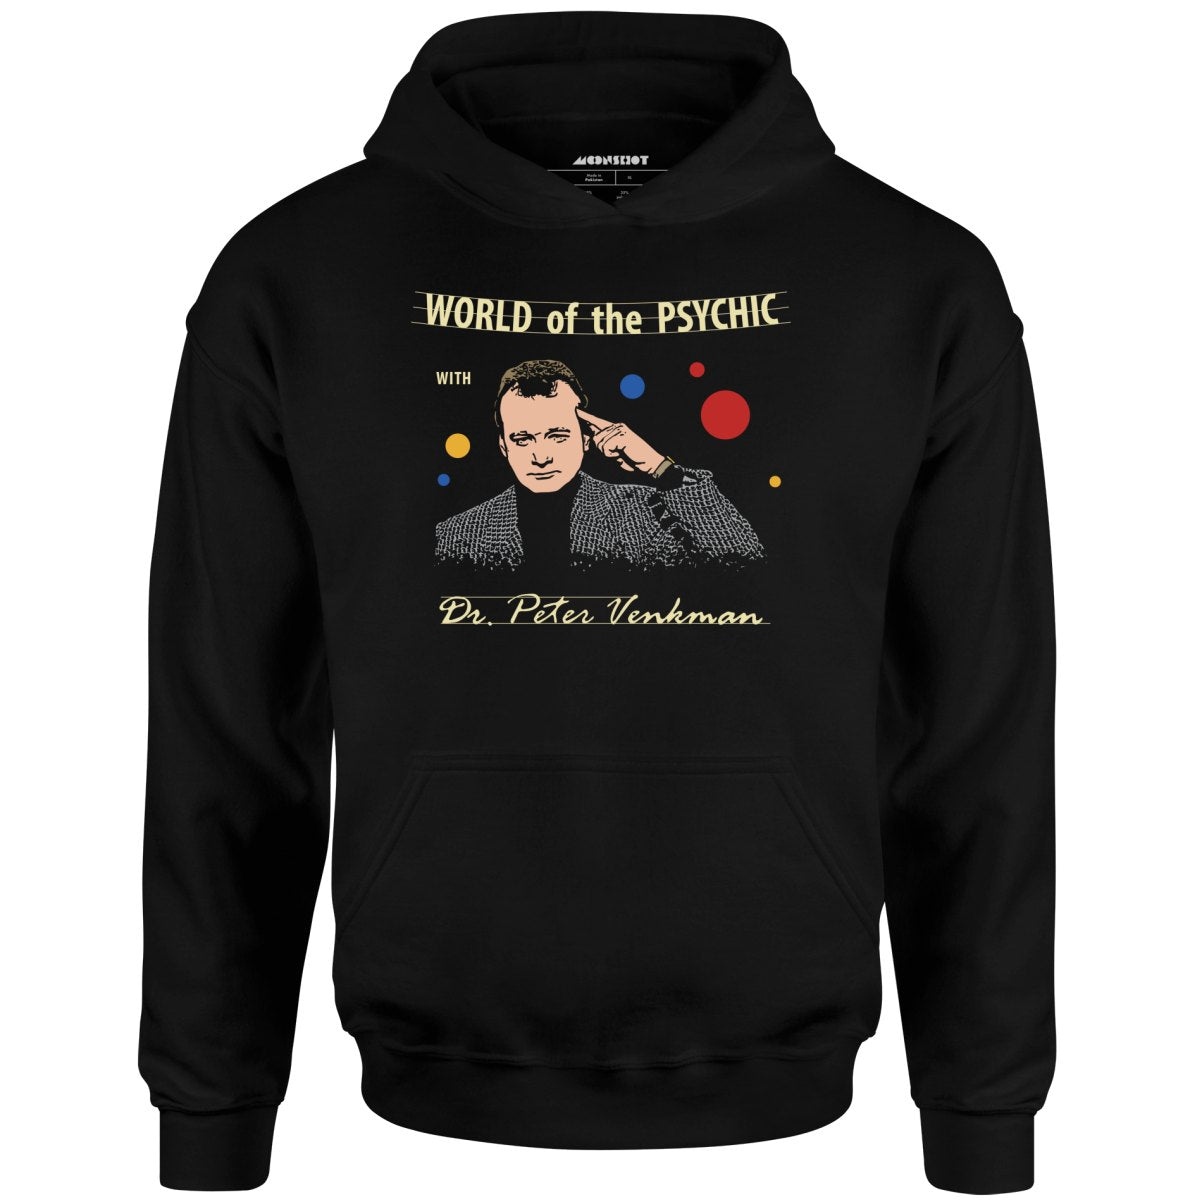 World of the Psychic with Dr. Peter Venkman - Unisex Hoodie